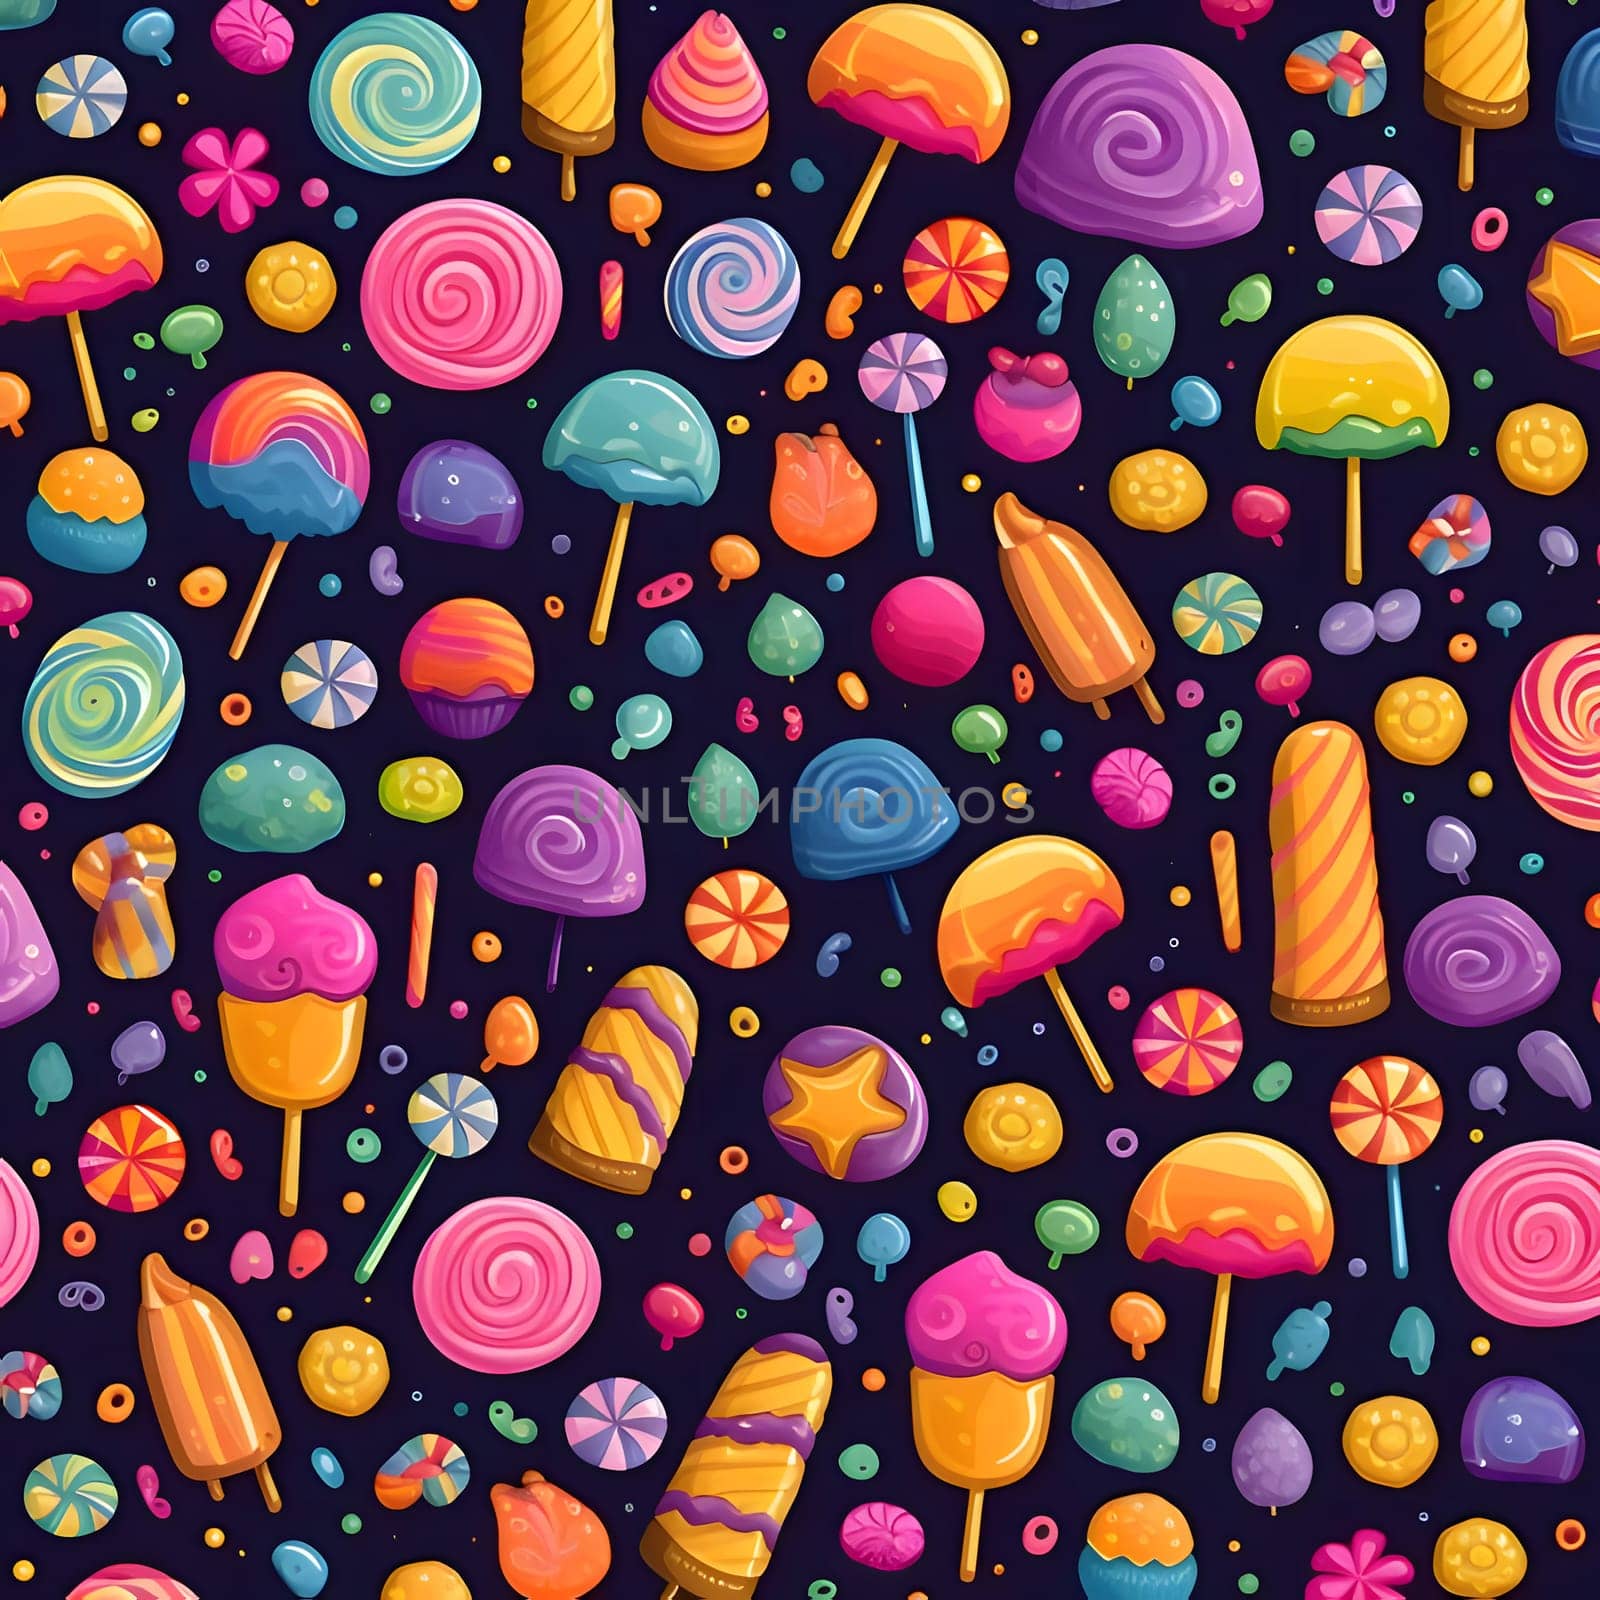 Patterns and banners backgrounds: Seamless pattern with lollipops and candies. Vector illustration.